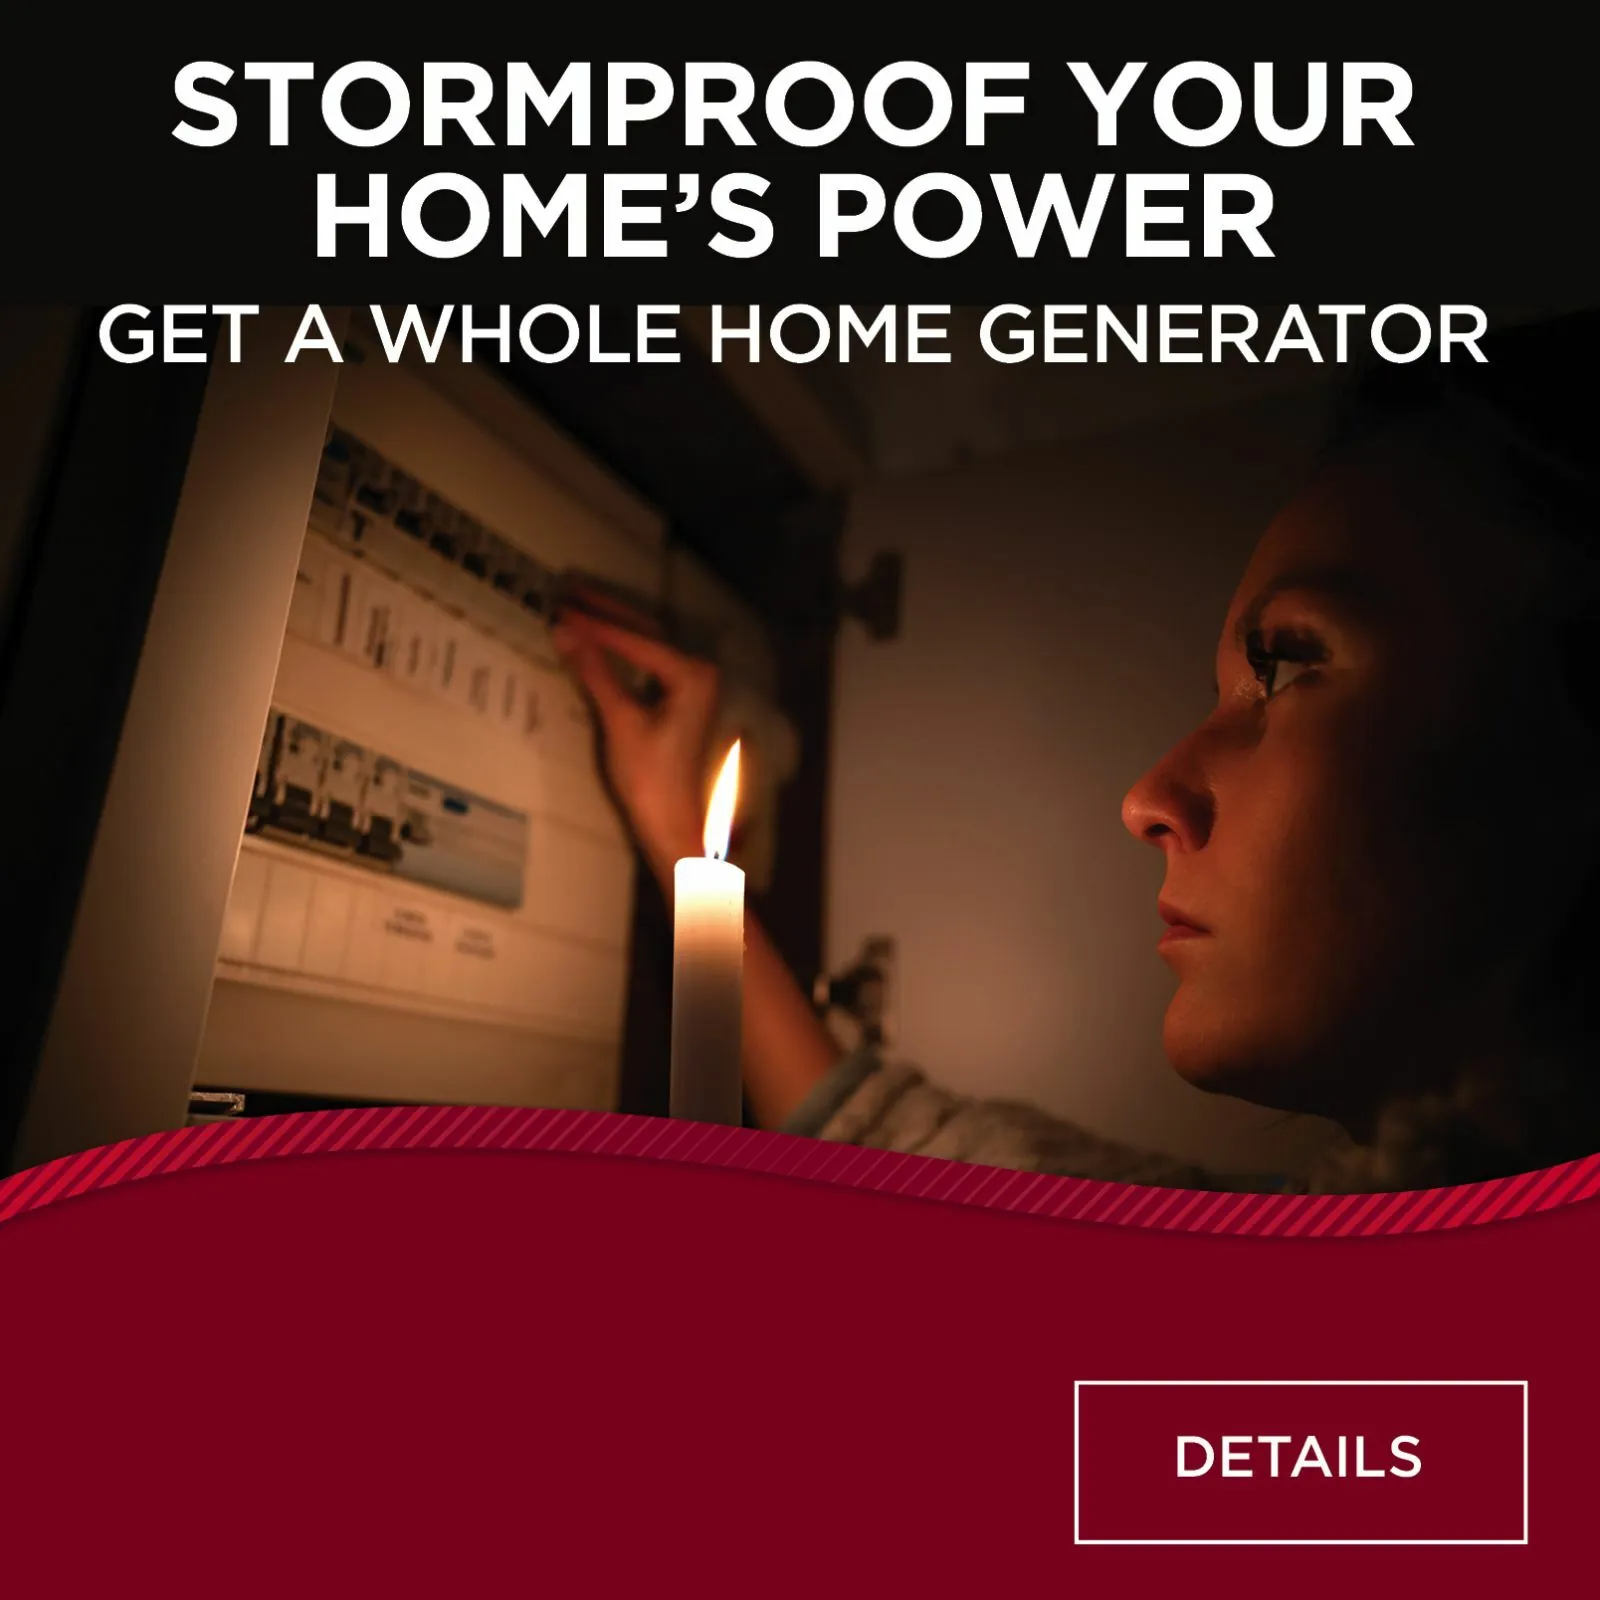 Whole Home Generators offer